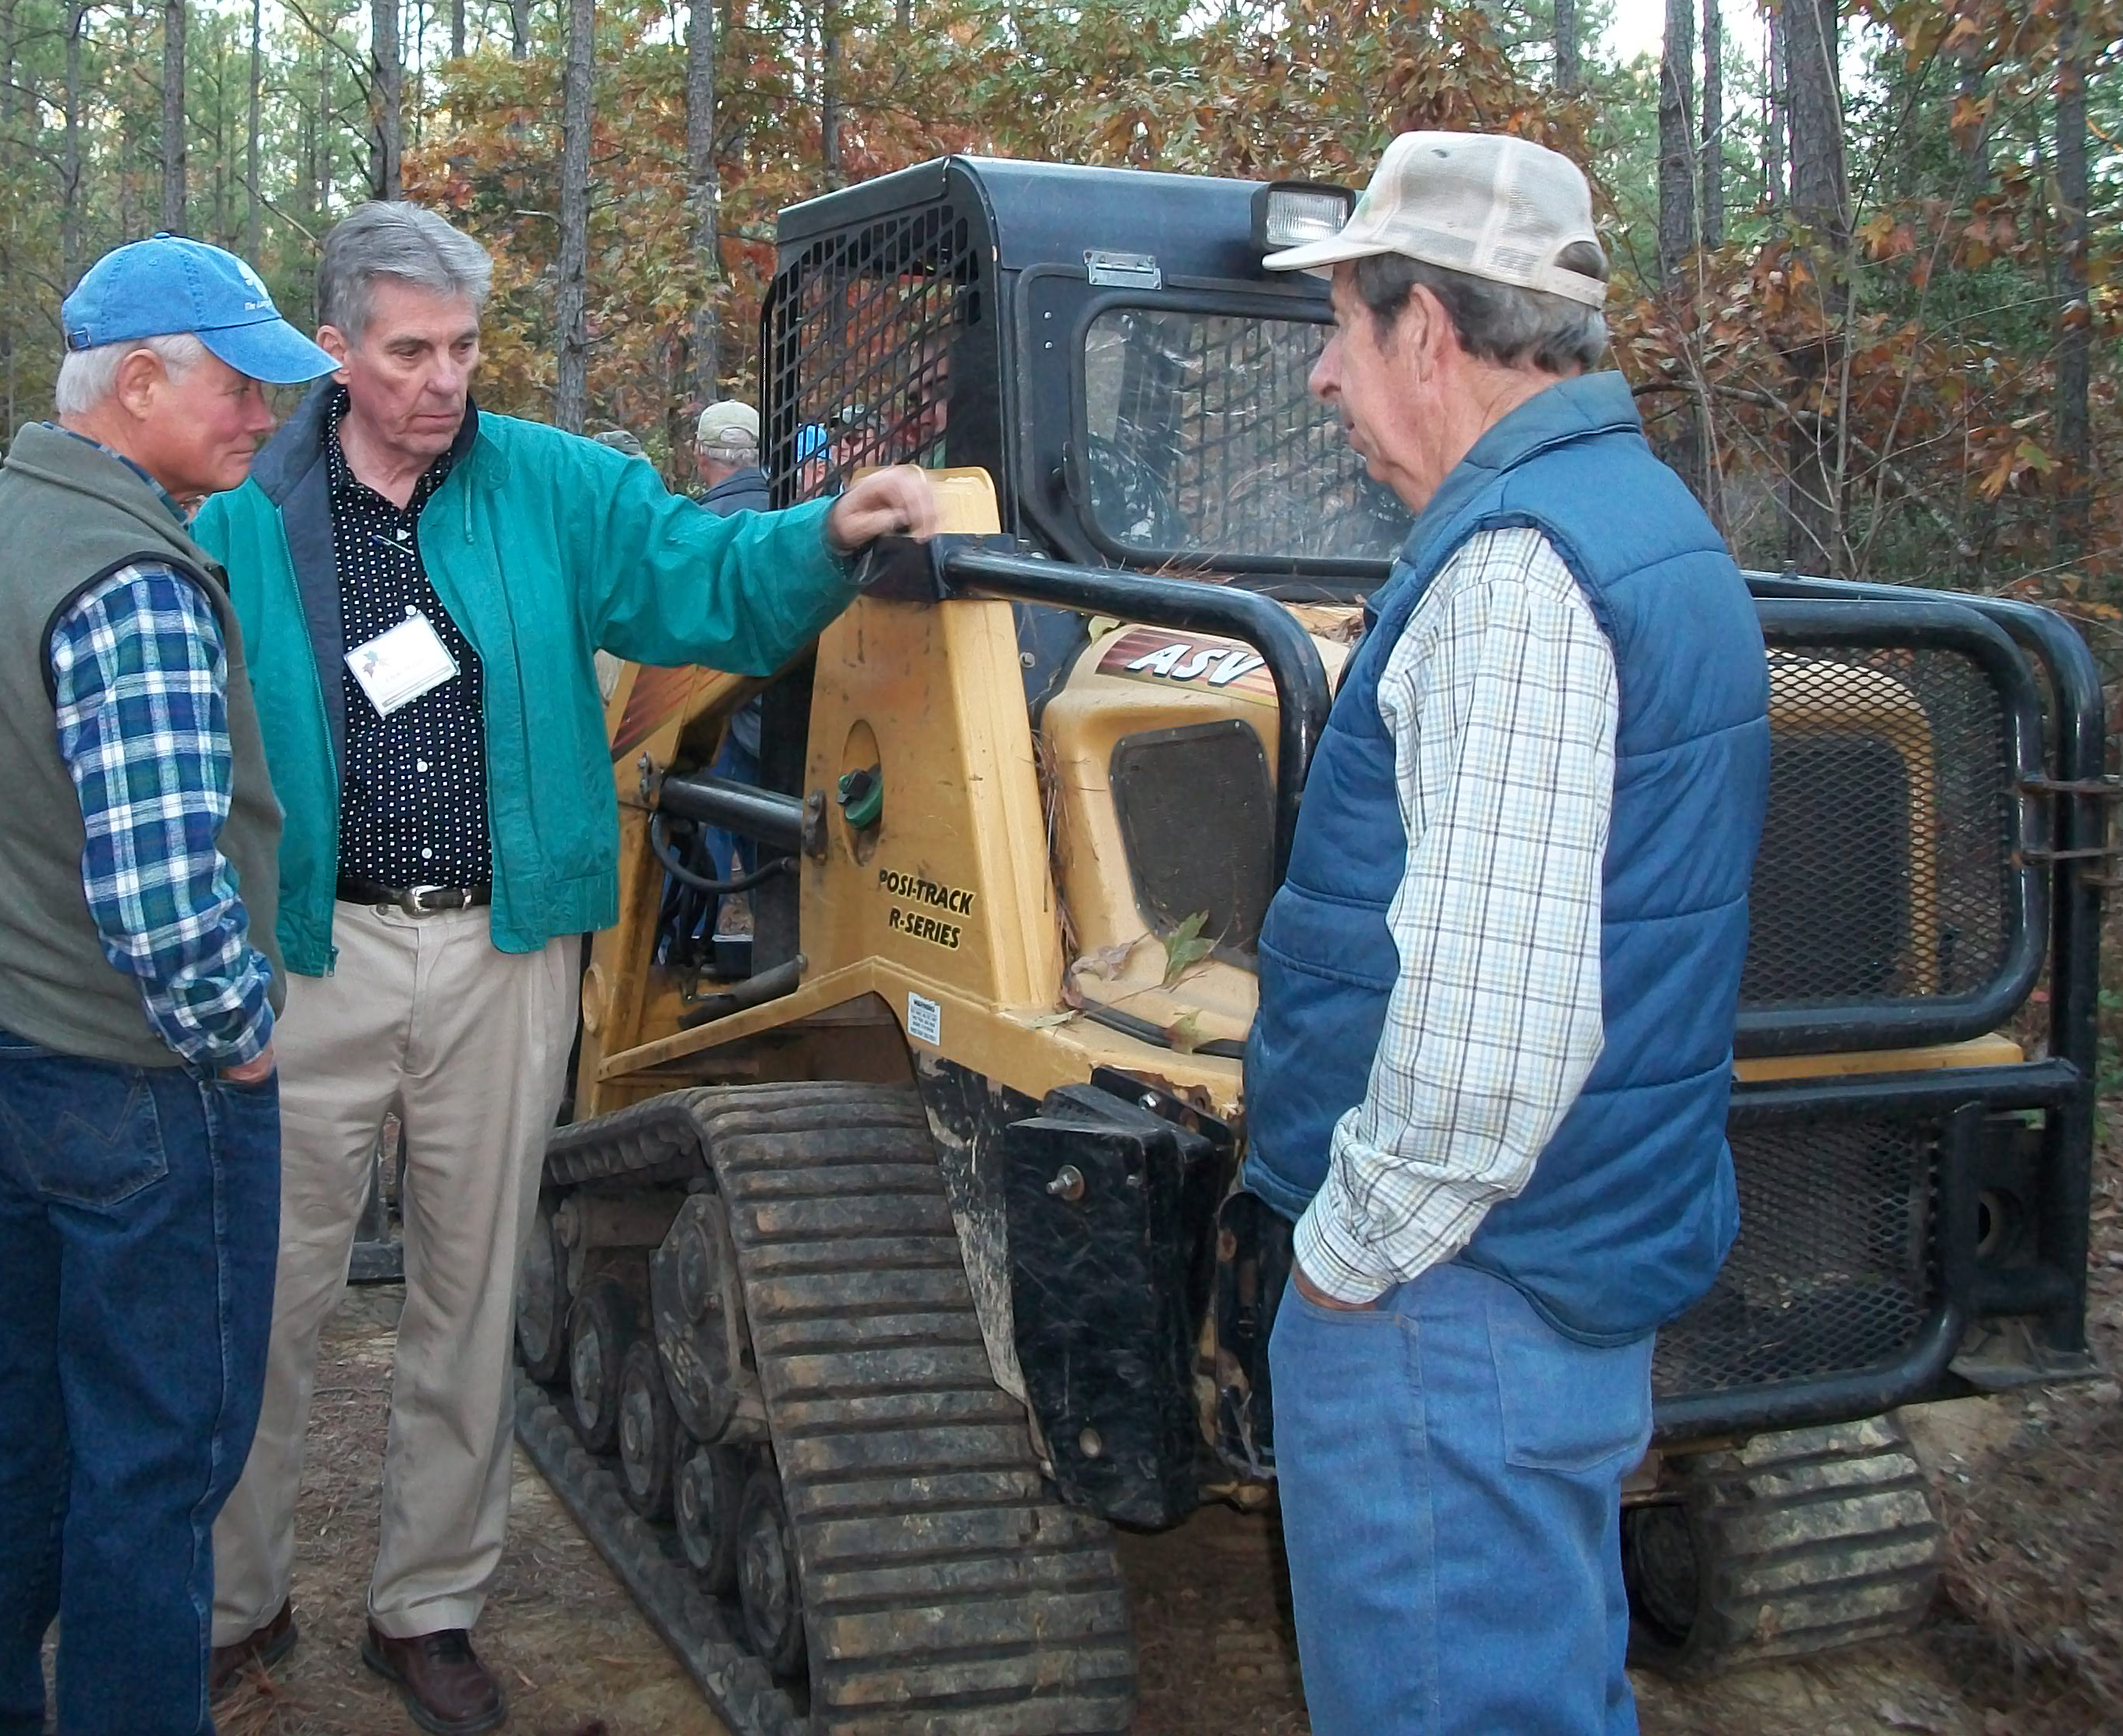 Three men stand looking at a small-scale skidder in a forest.